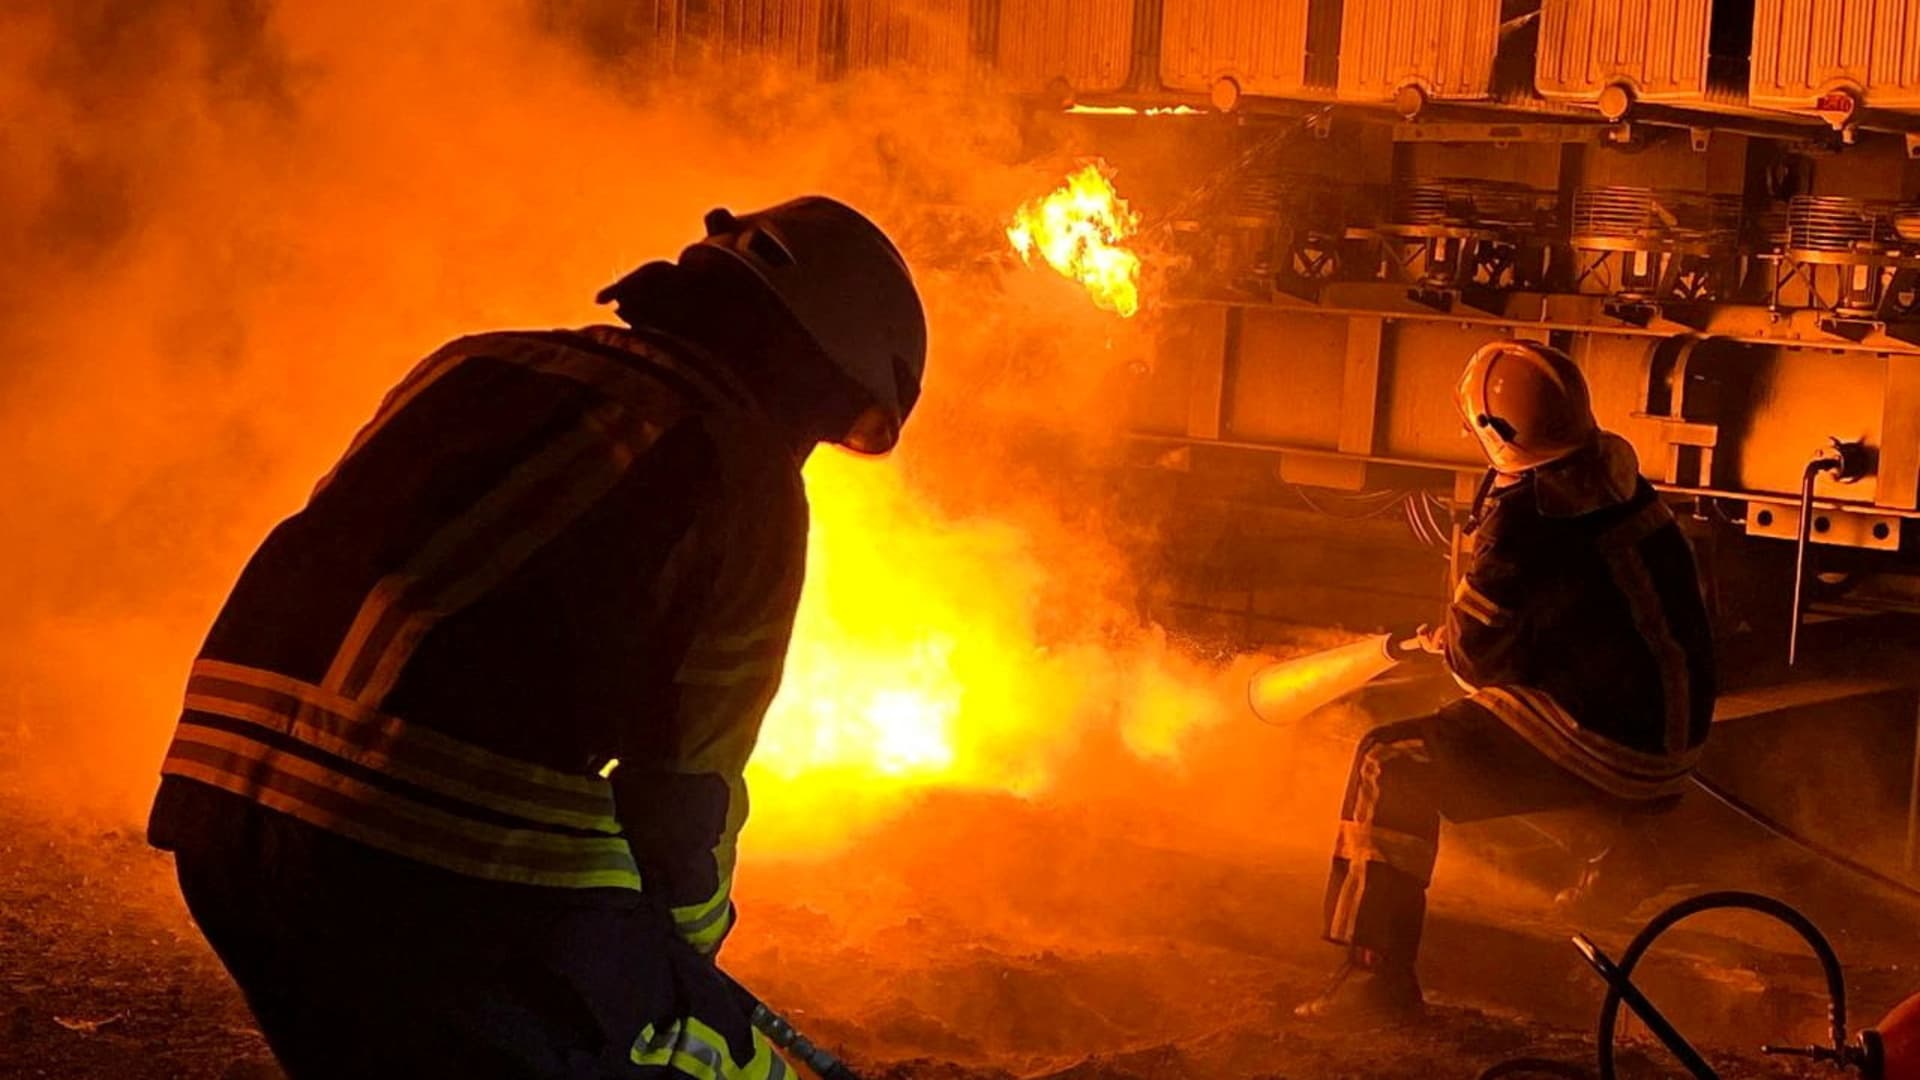 Firefighters work to put out a fire at energy infrastructure facilities, damaged by Russian missile strike, as Russia's attack on Ukraine continues, in Kyiv region, Ukraine November 15, 2022.